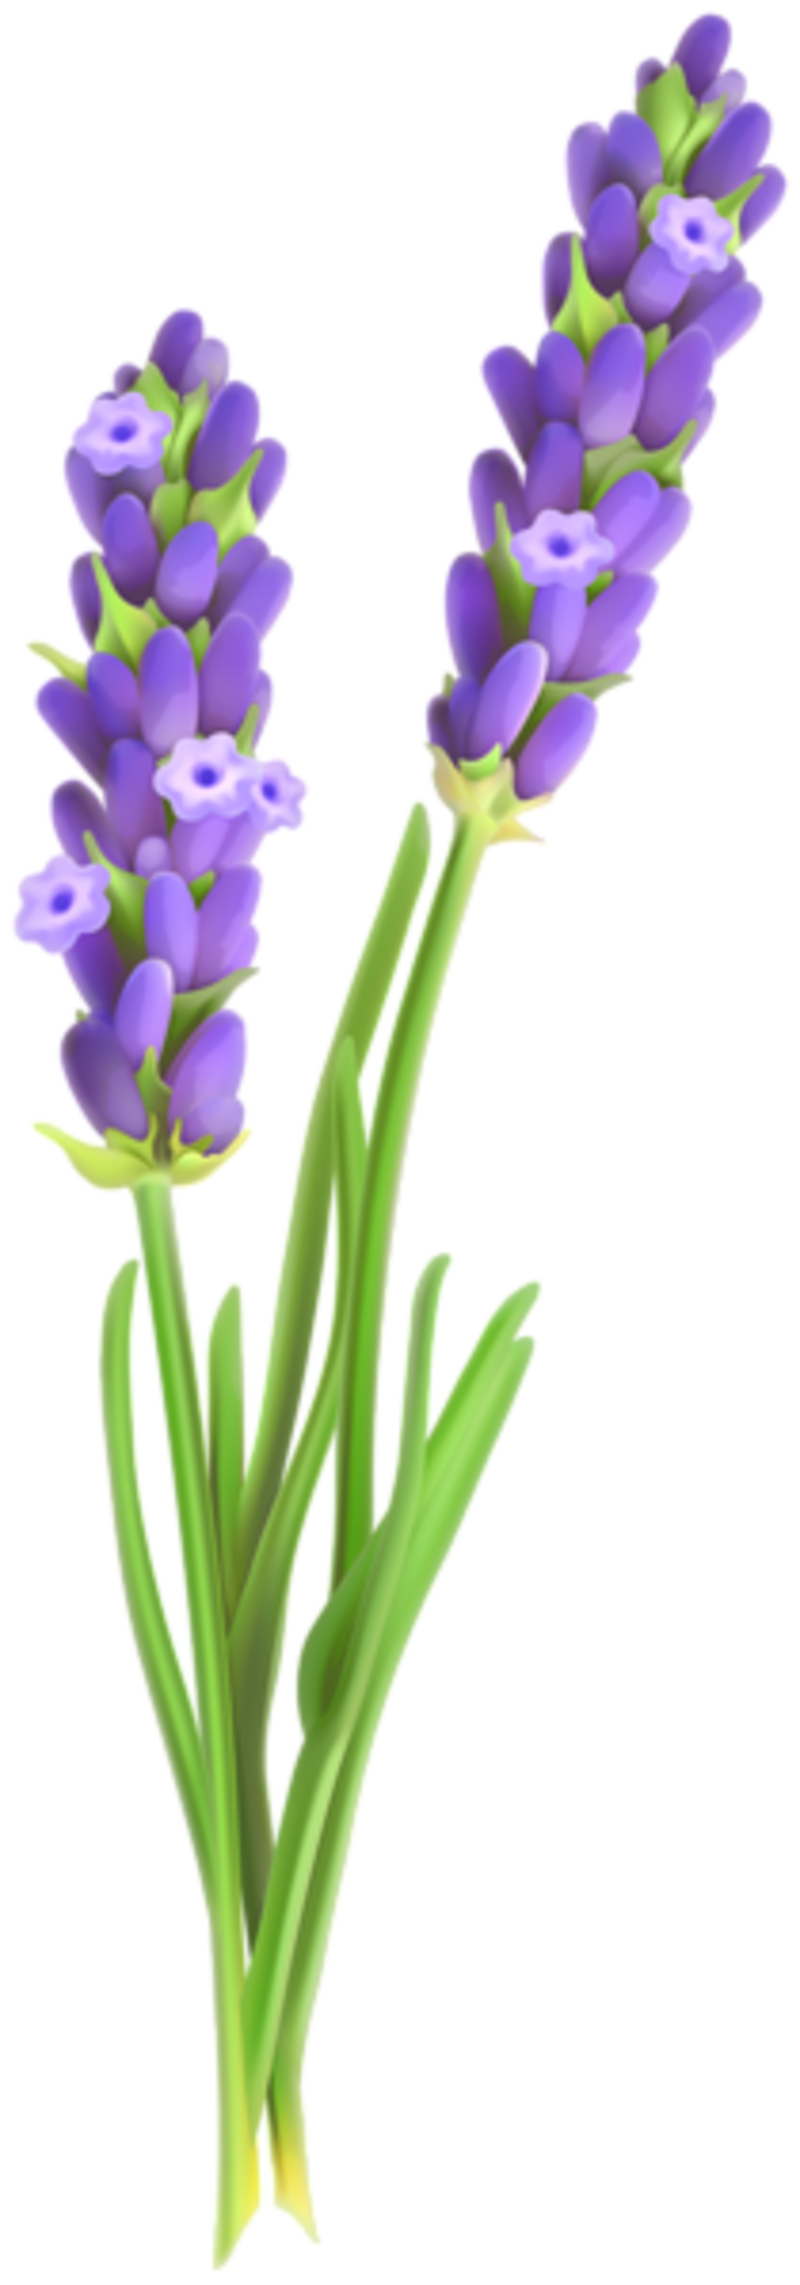 Lavender Clipart Png Png Image Collection